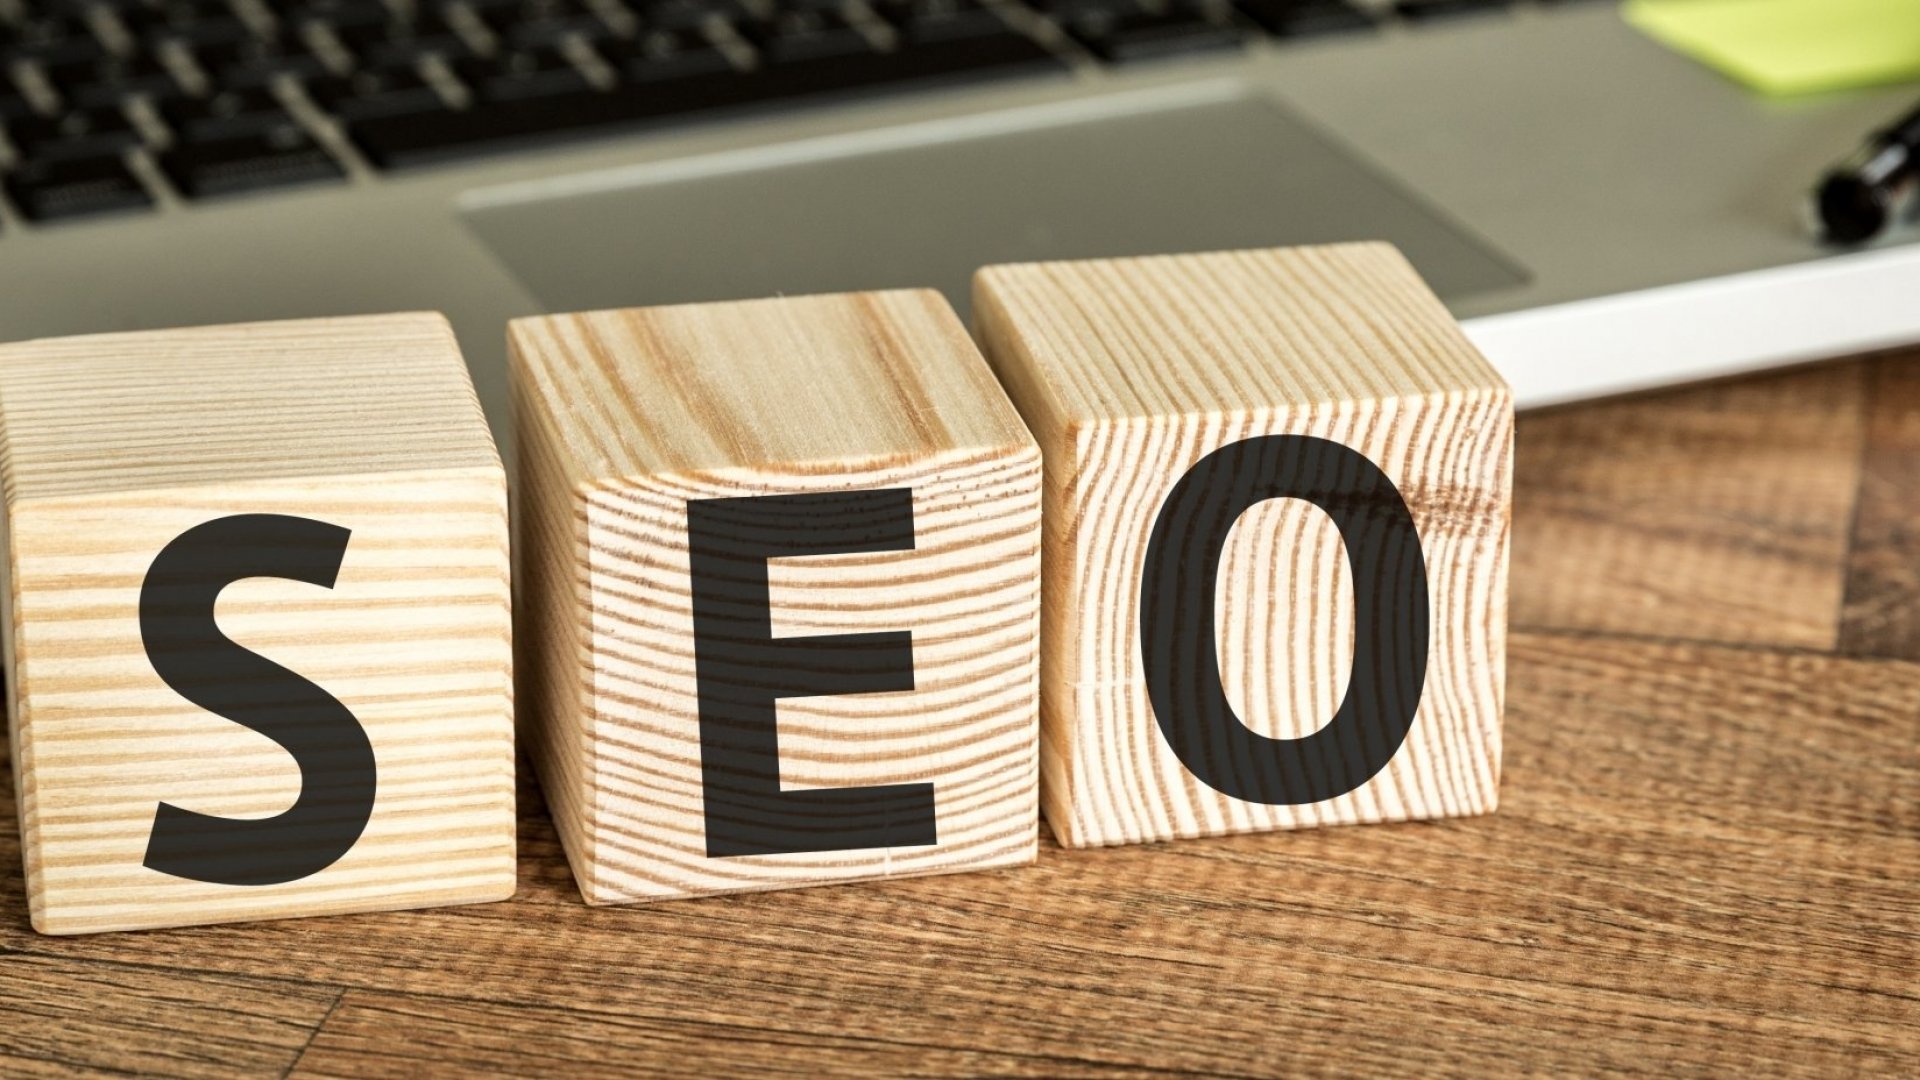 Why this four letter domain sold for $106k (and other SEO-related sales)